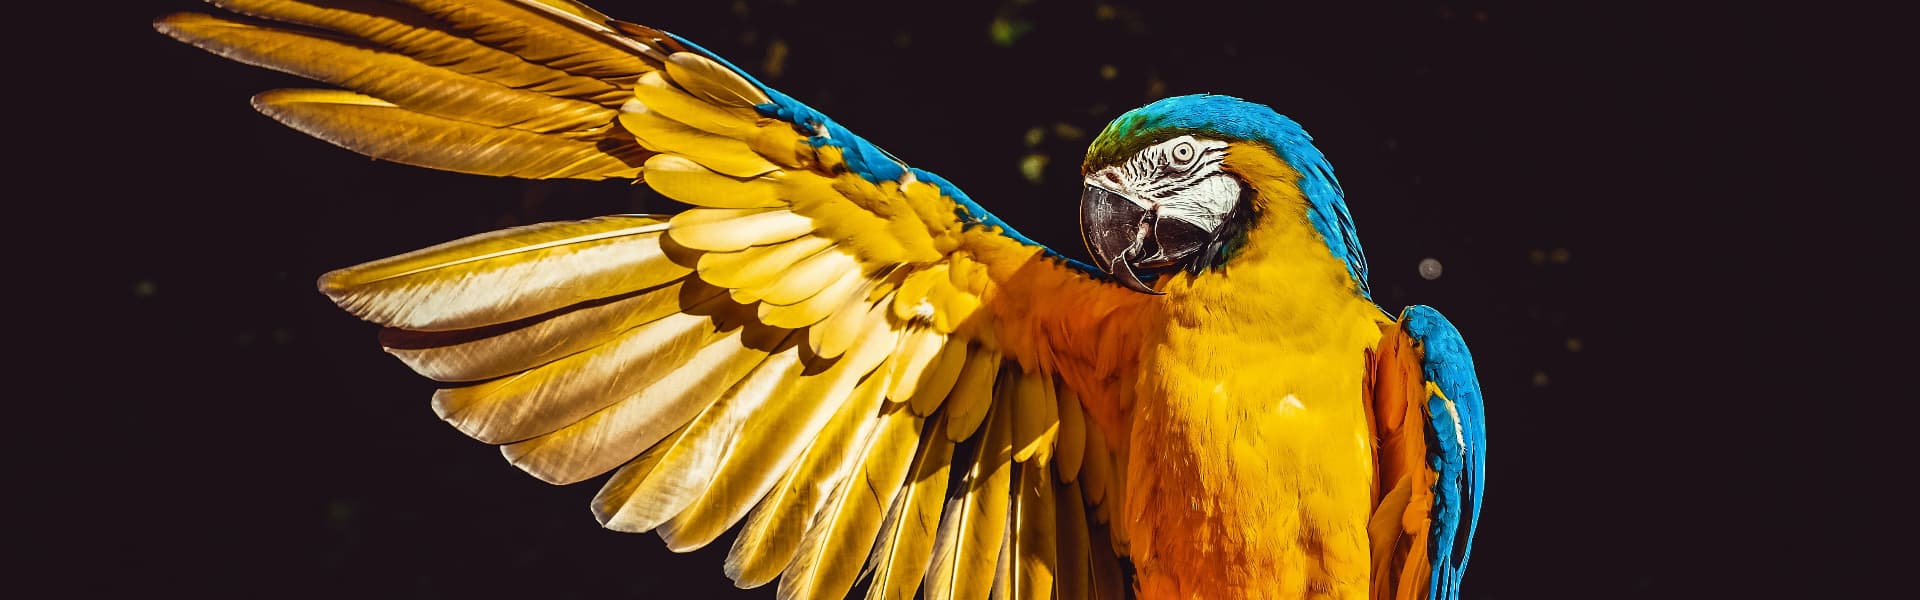 macaw bird fanning out one wing against dark background